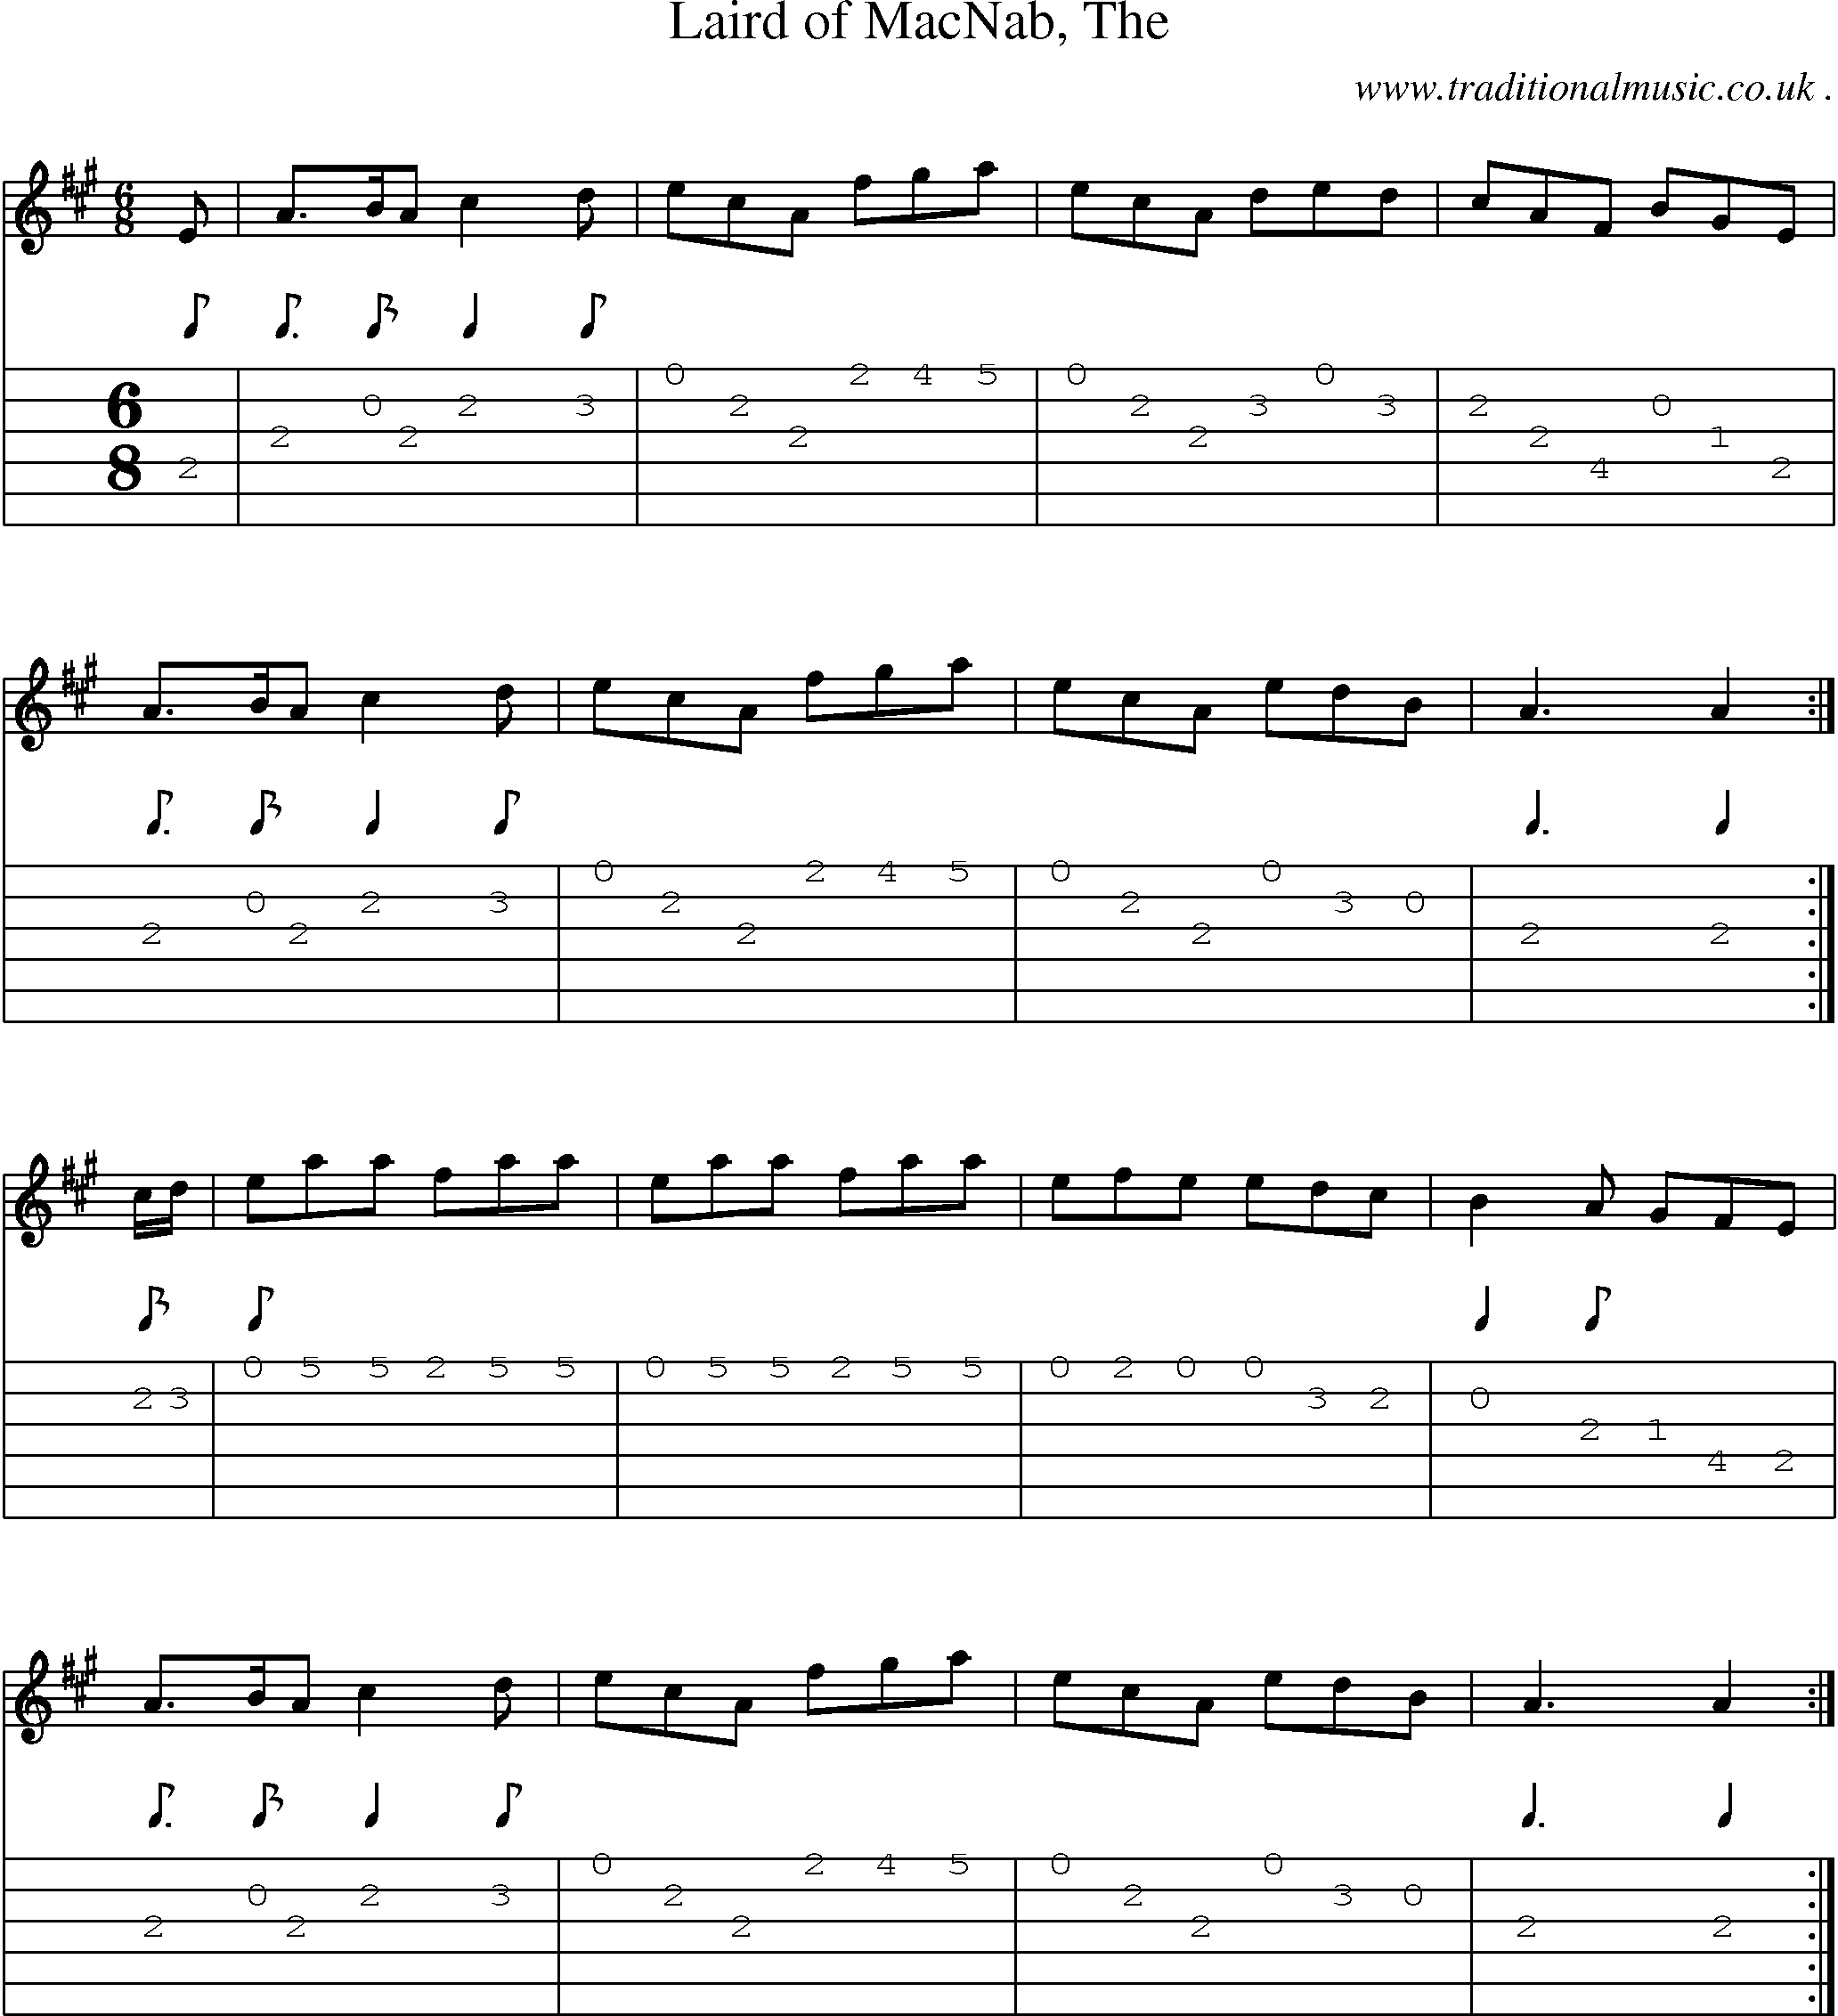 Sheet-music  score, Chords and Guitar Tabs for Laird Of Macnab The